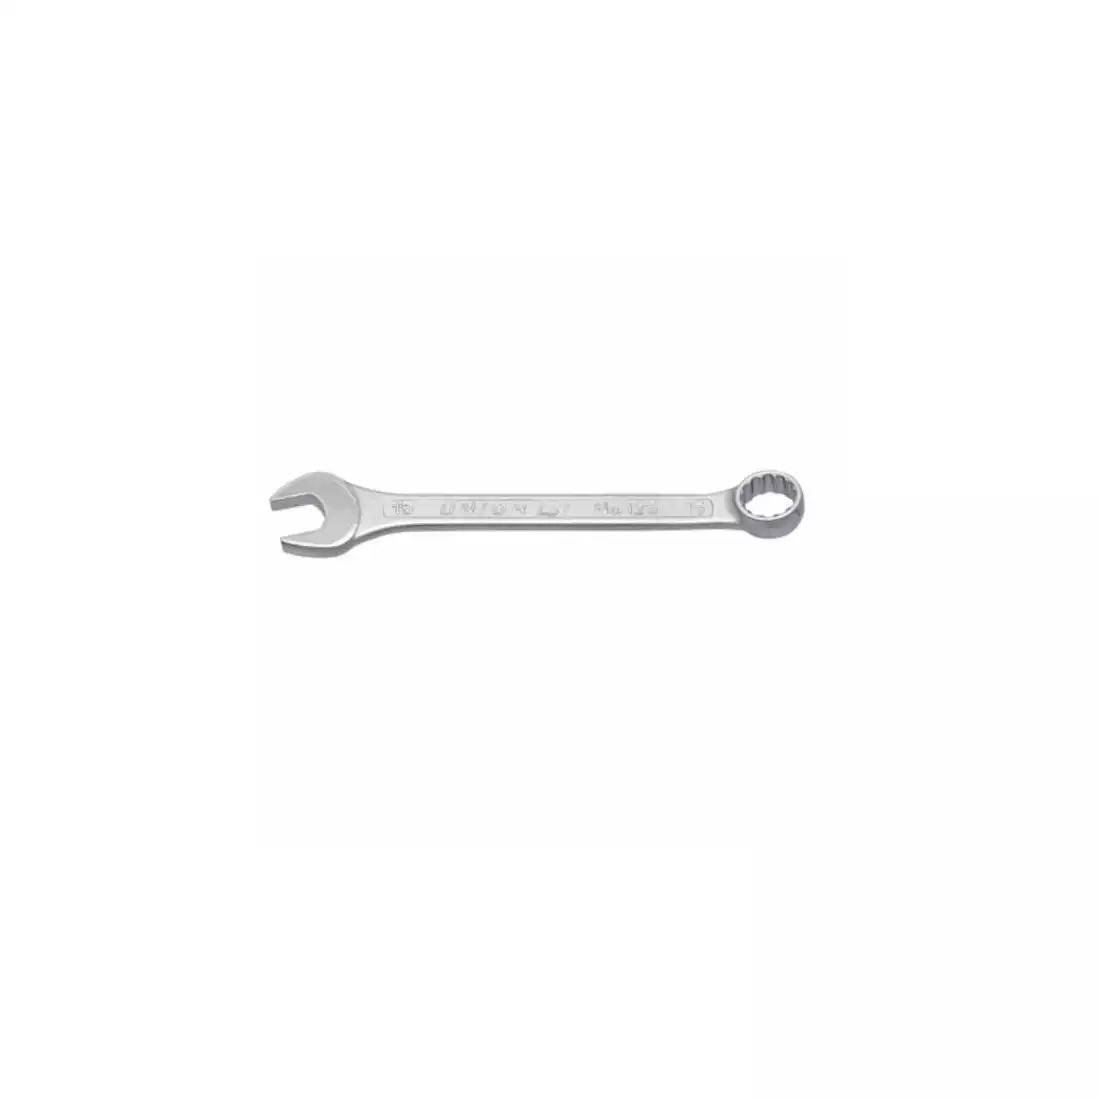 UNIOR combination wrench, short type 8 mm